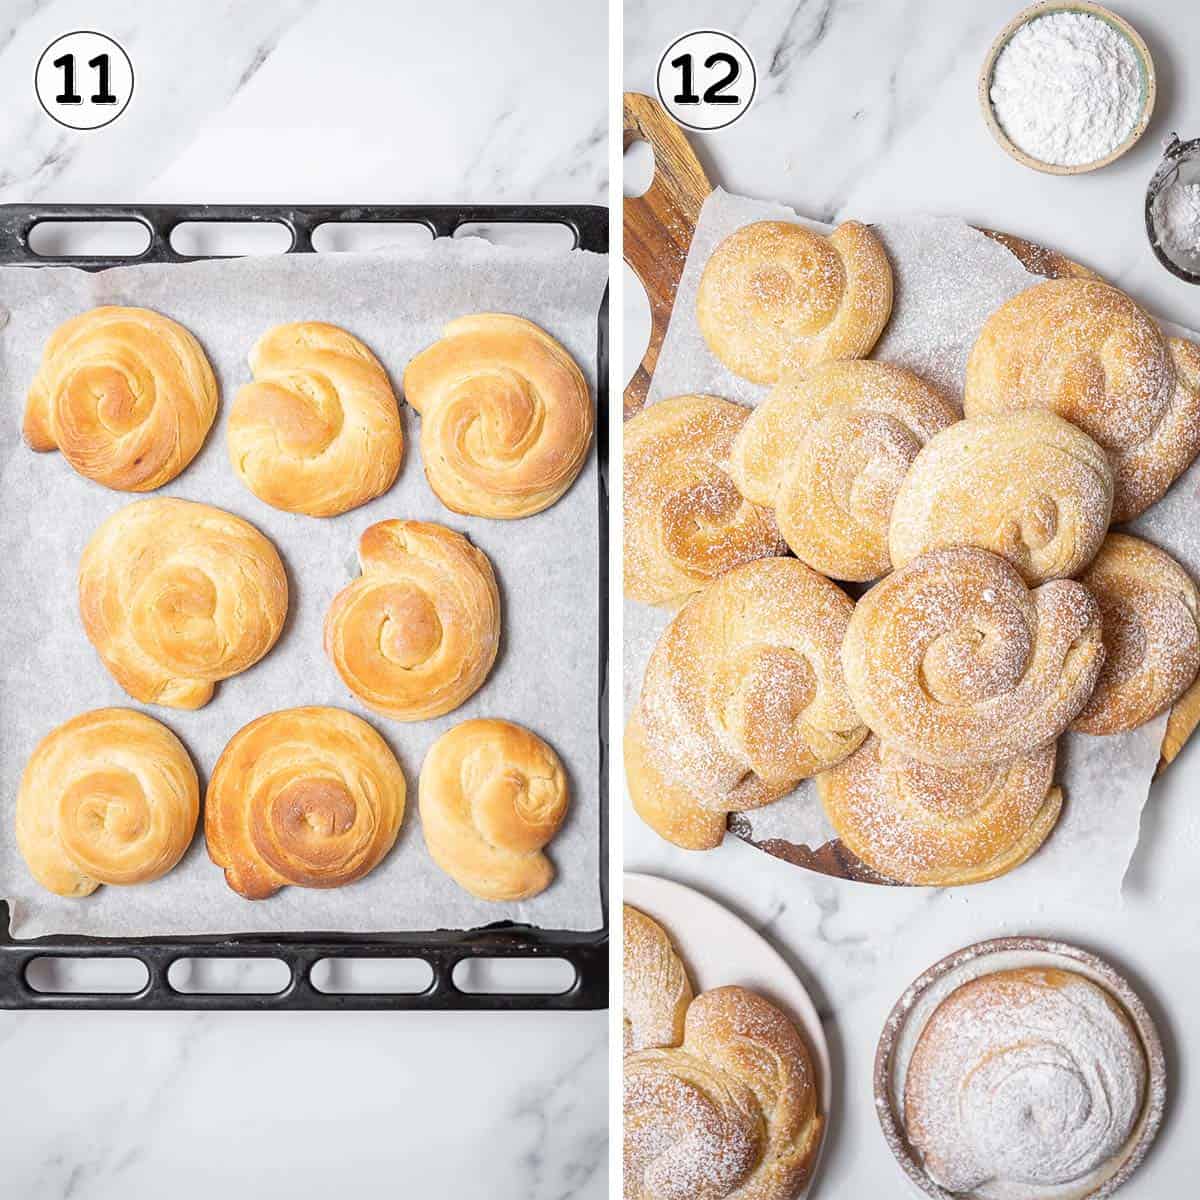 baked ensaimadas before and after sprinkling with powdered sugar.